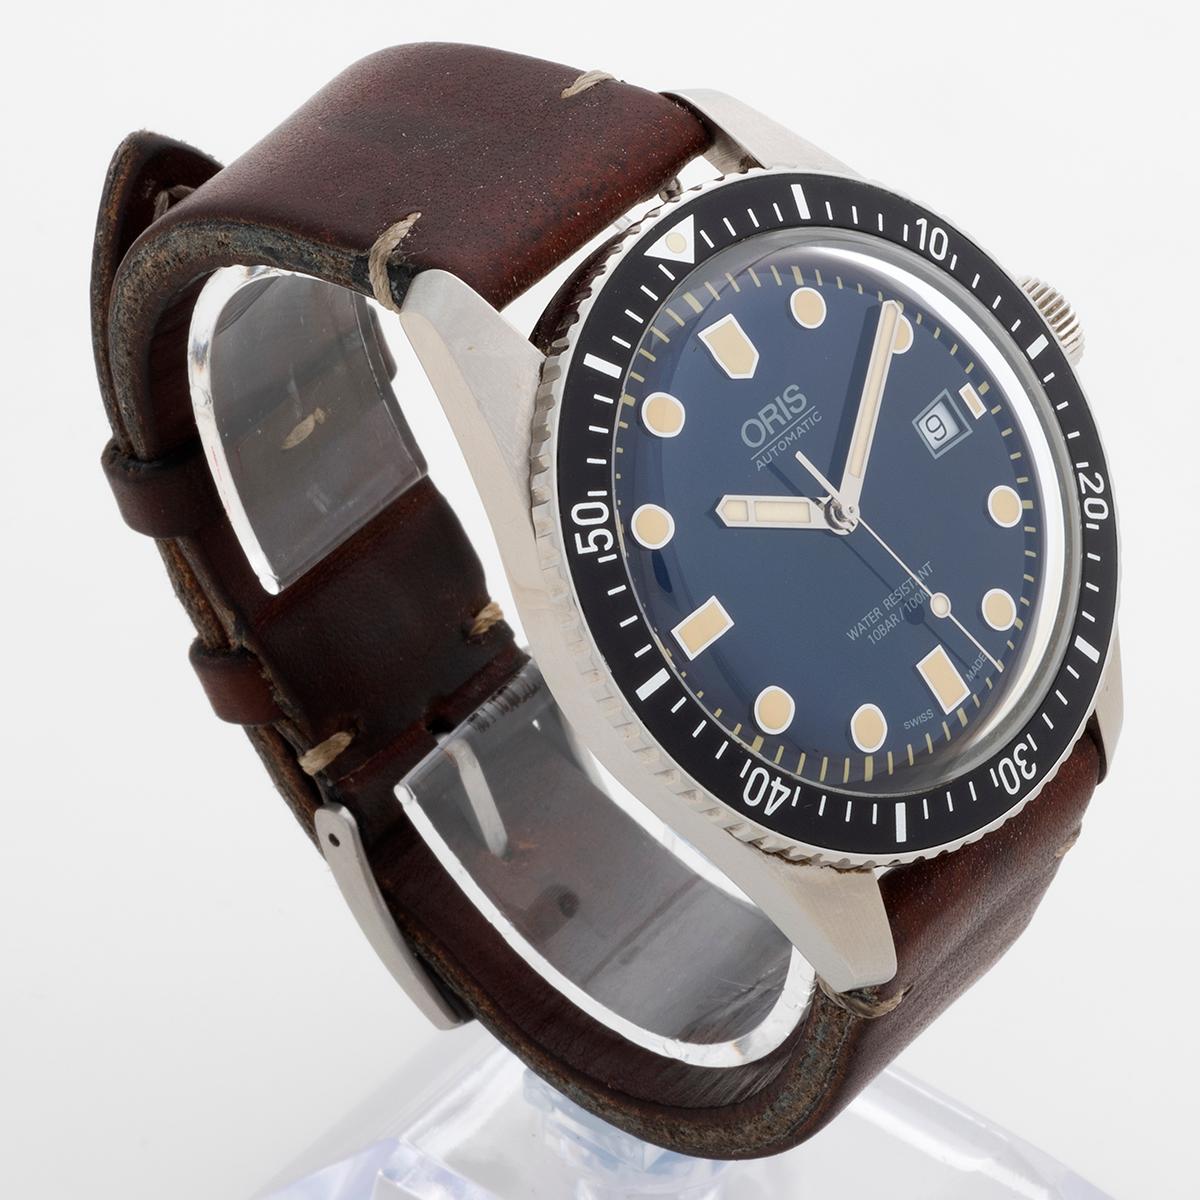 Our Oris Divers Sixty Five, reference 01 733 7720 4055, features a 42mm stainless steel case, dark blue dial and original leather strap with tang buckle. This reference is discontinued, providing a superb vintage inspired dive watch and this example